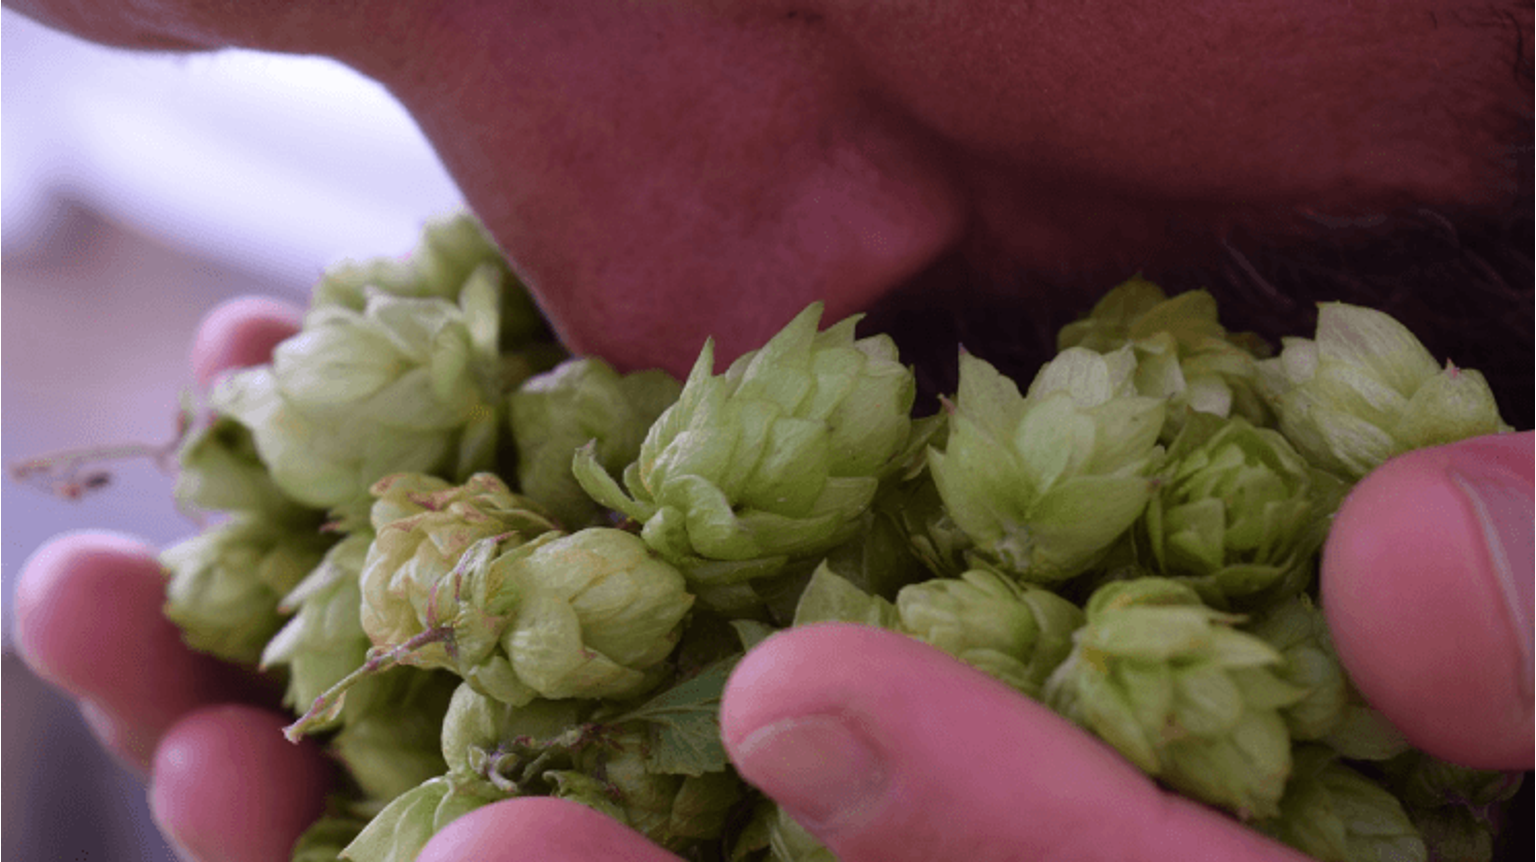 thumbnail for blog article named: Give your beer an even bigger hops flavour with Dry Hopping.